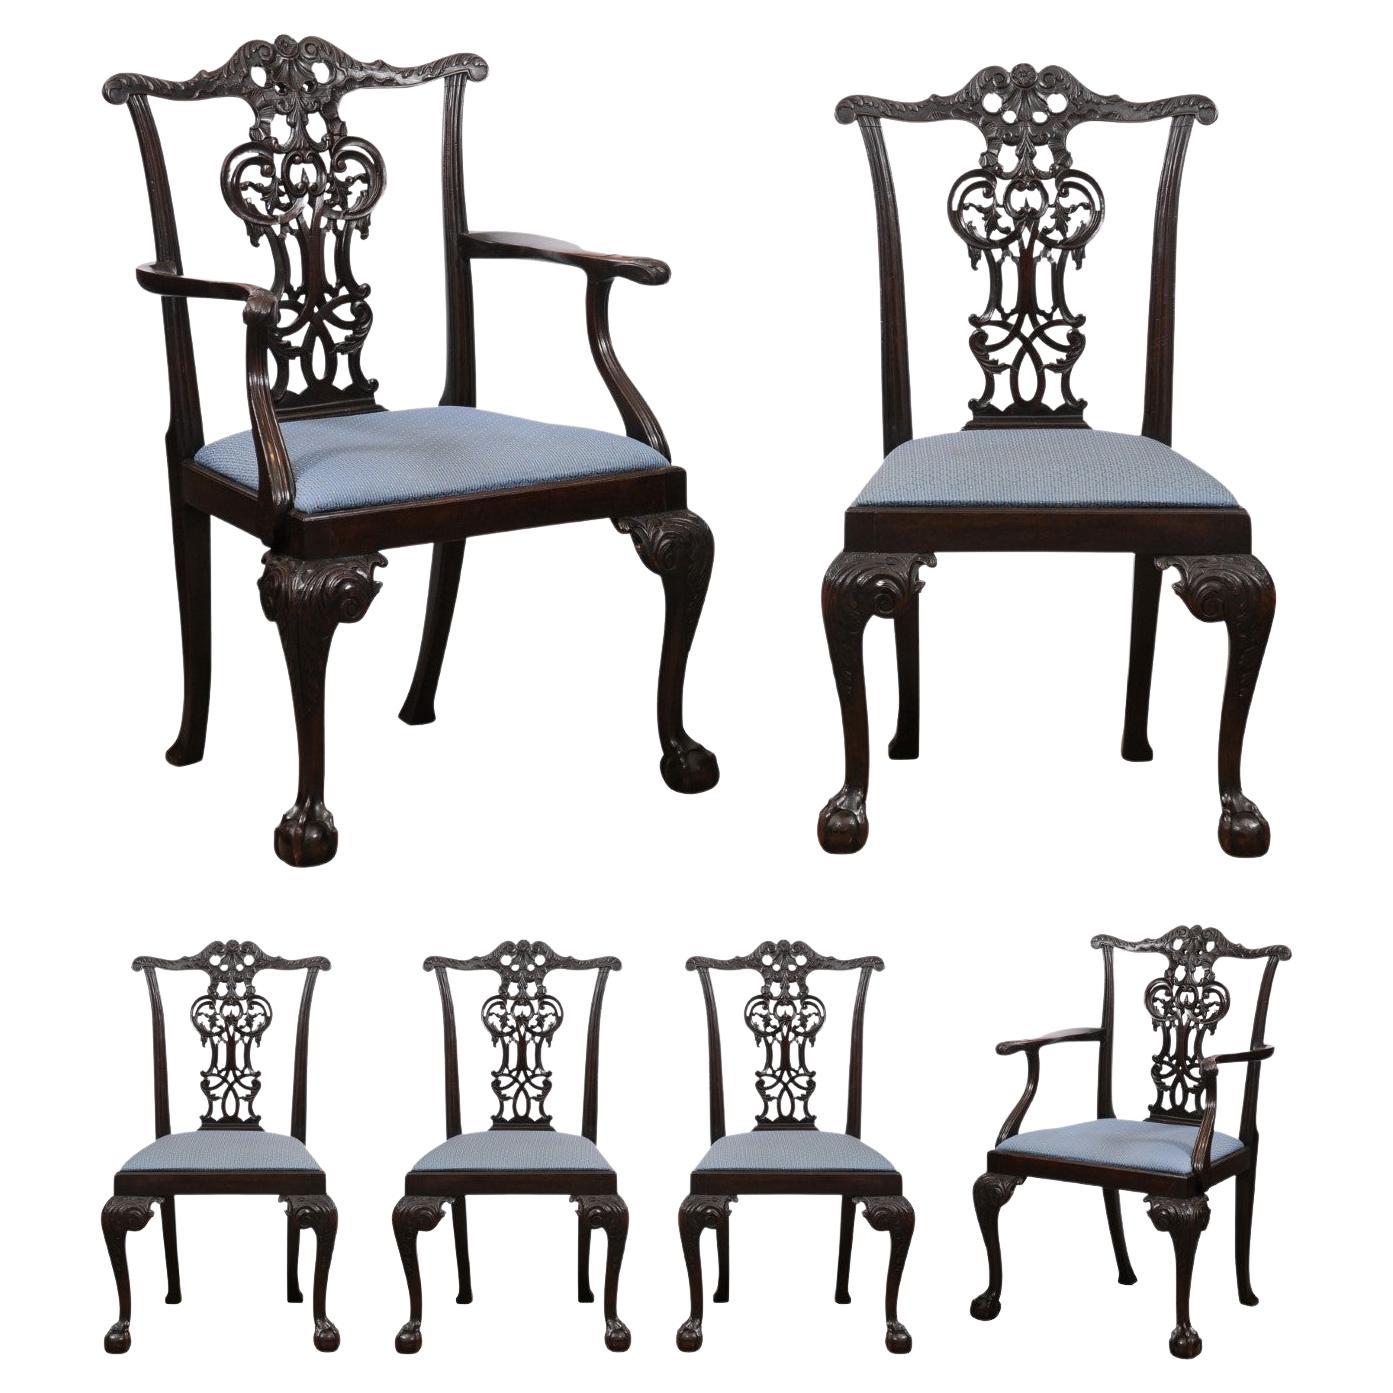 Set of 6 English Chippendale Style Mahogany Dining Chairs with Ball & Claw Feet